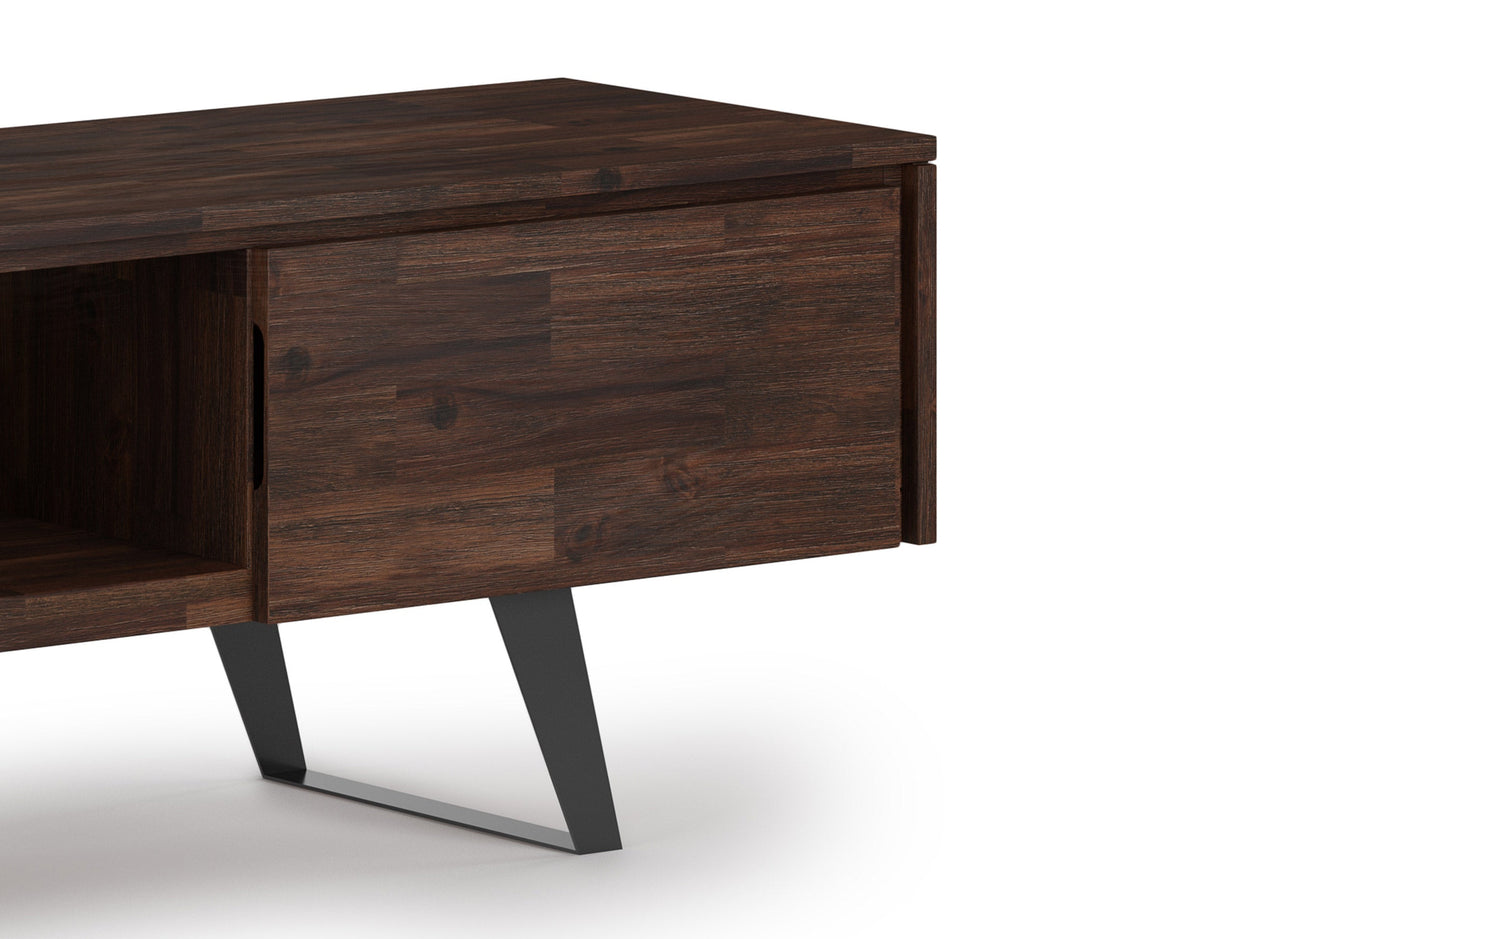 Distressed Charcoal Brown Acacia | Lowry 72 inch TV Media Stand